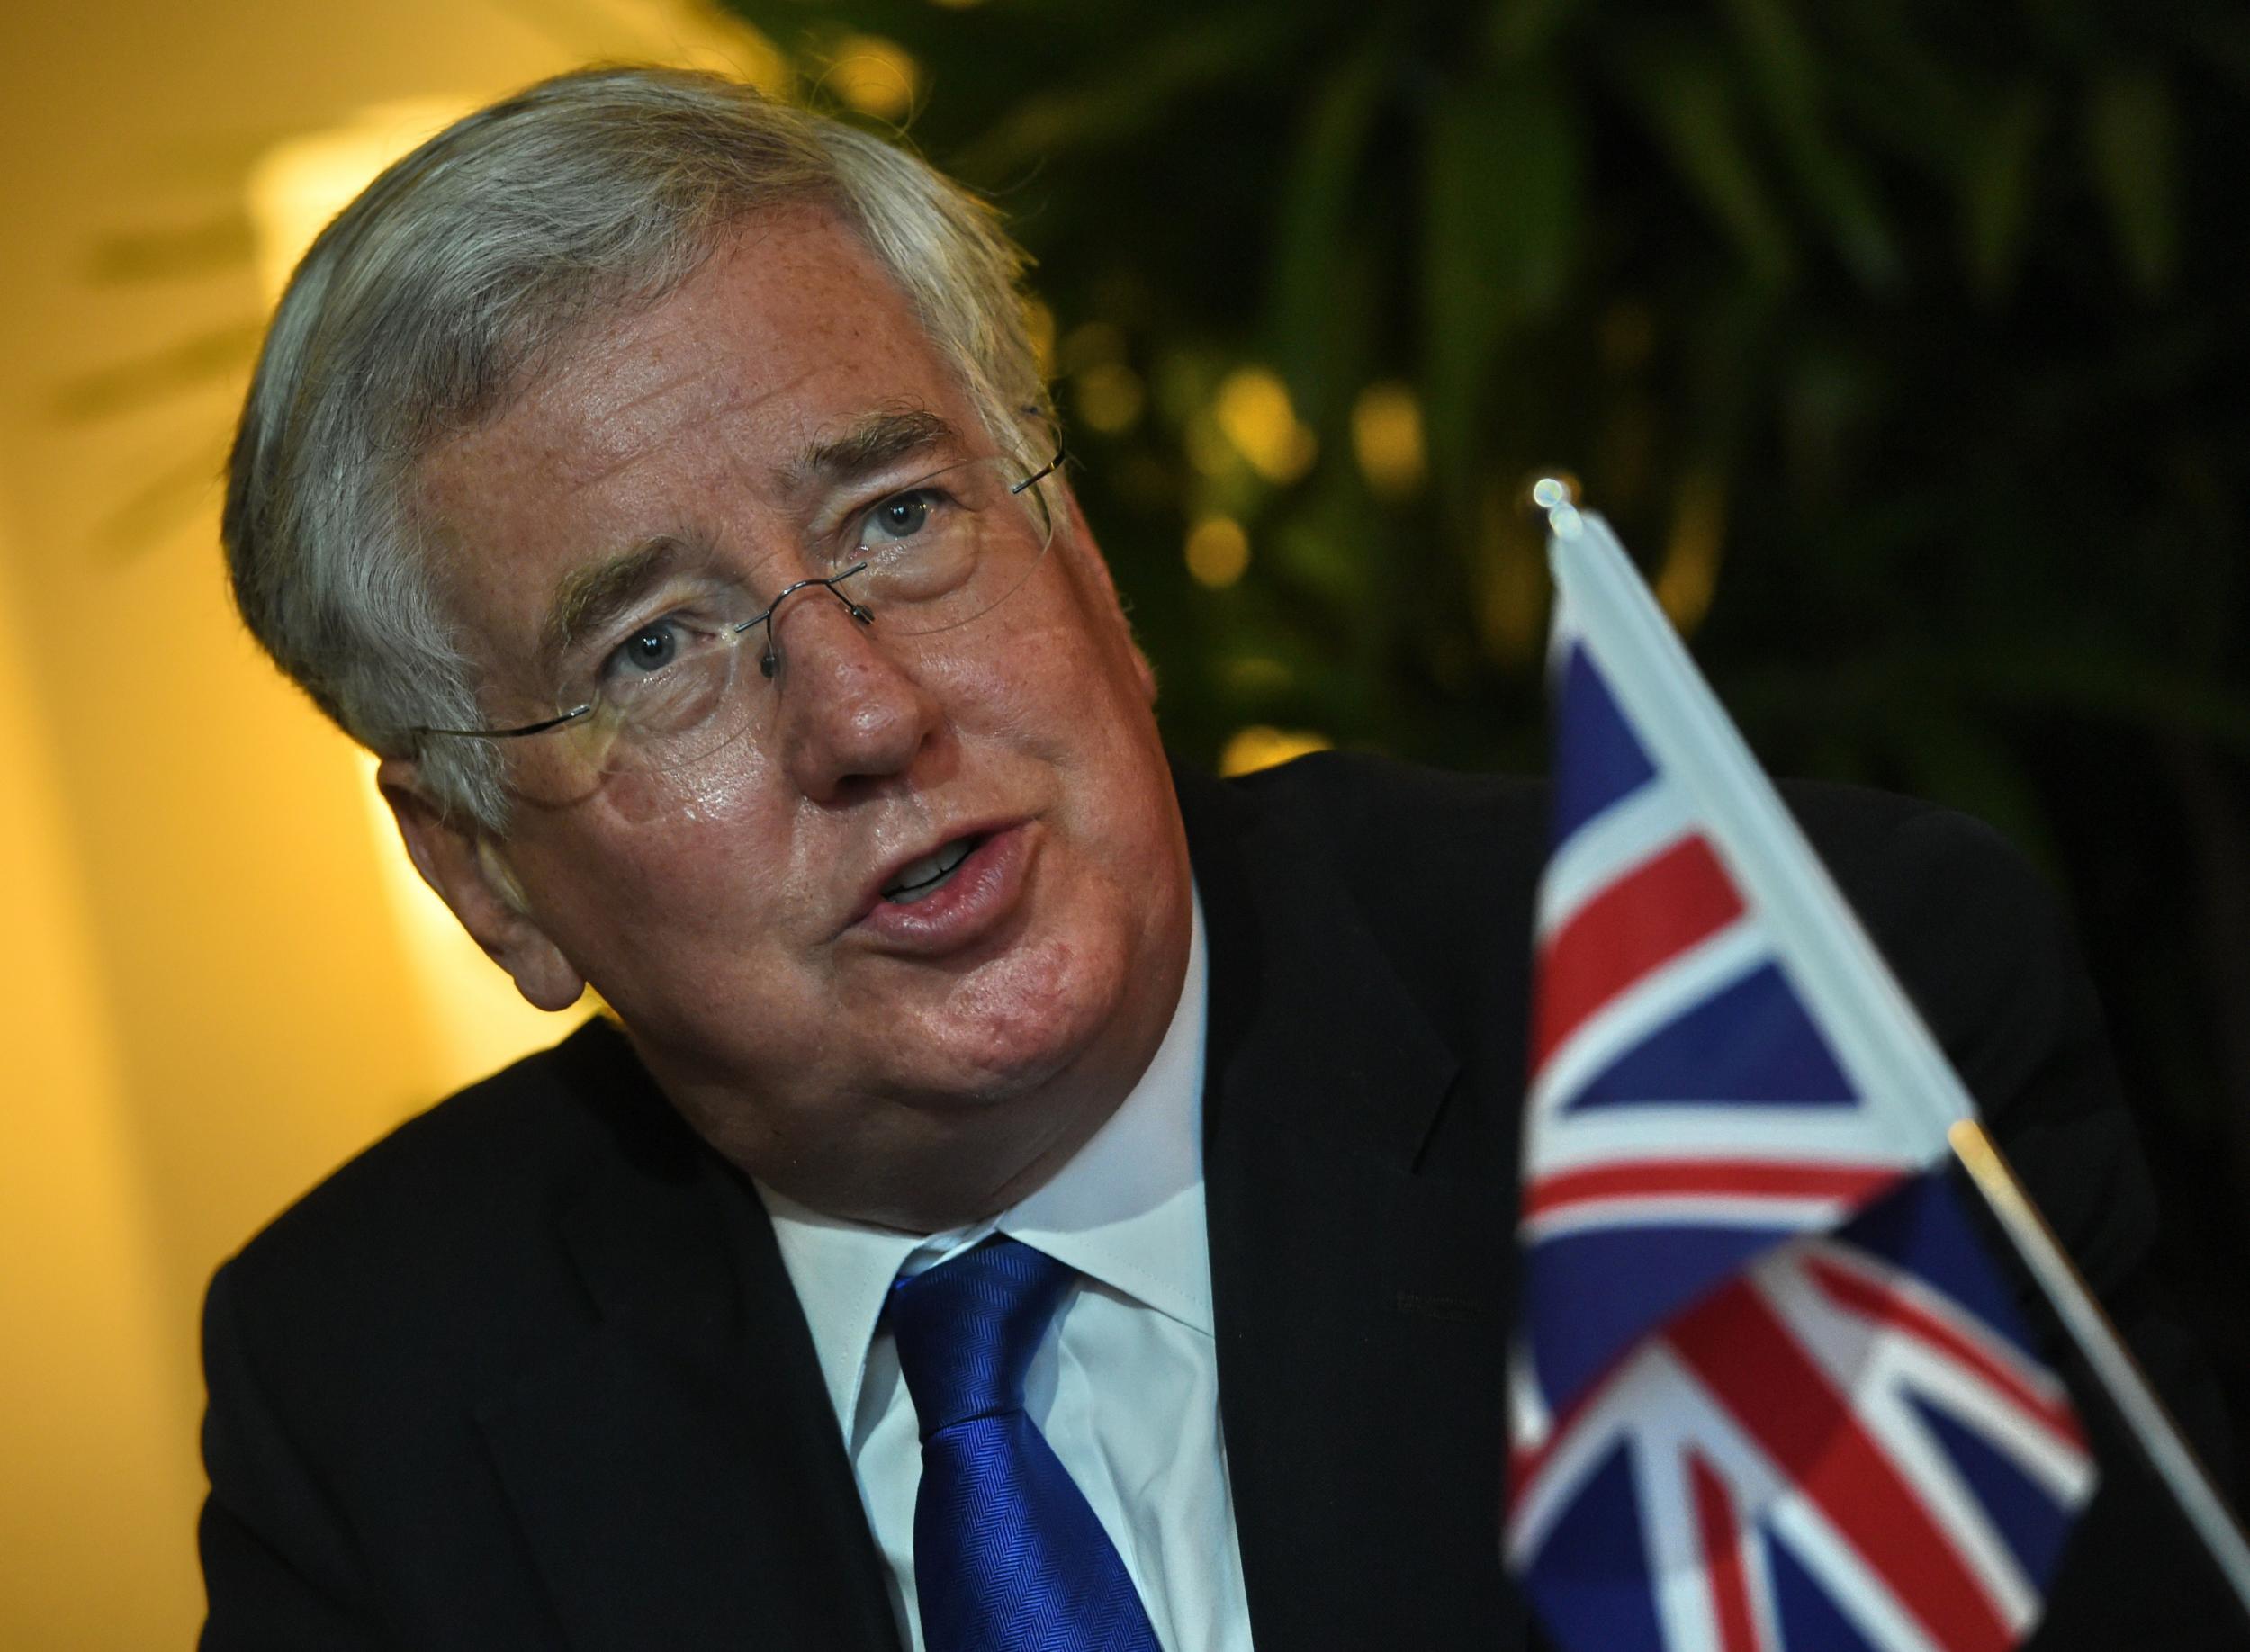 Mr Fallon revealed he will offer a secret briefing to MPs, setting out need to extend air strikes